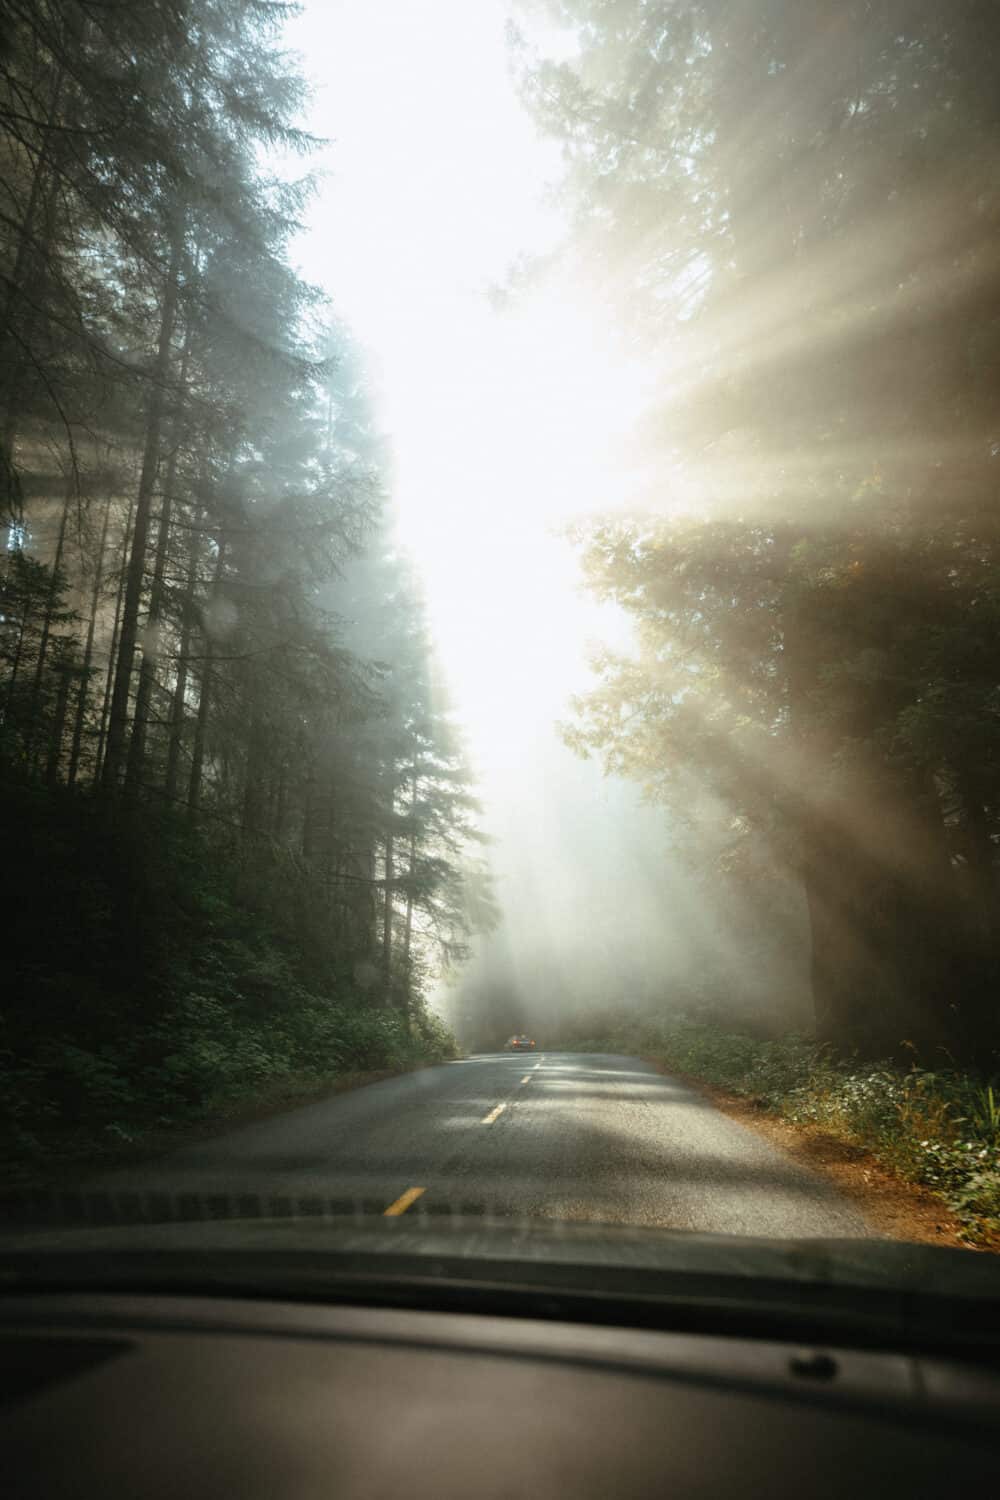 September Outdooor Holidays - Driving through the Redwoods with sun beams through the trees